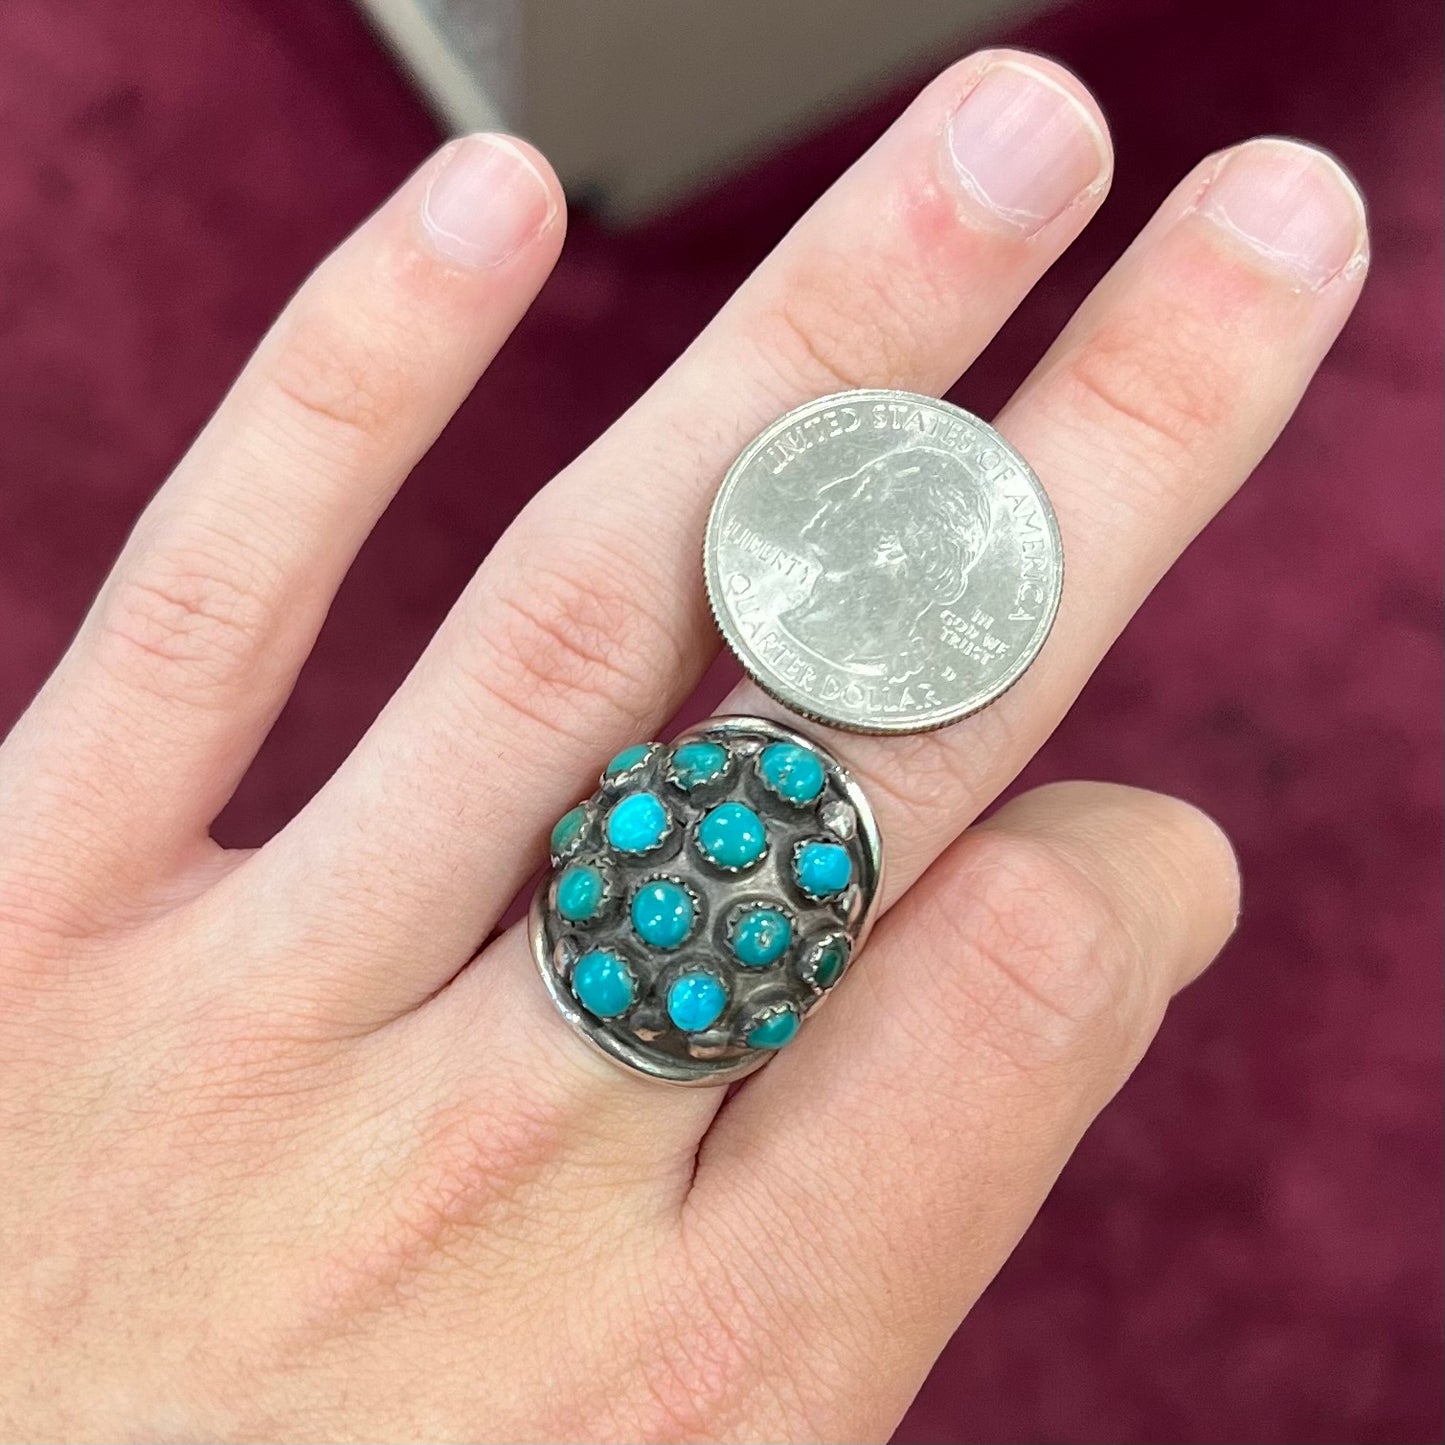 A handmade, unisex Hopi silver ring set with 14 round turquoise cabochons.